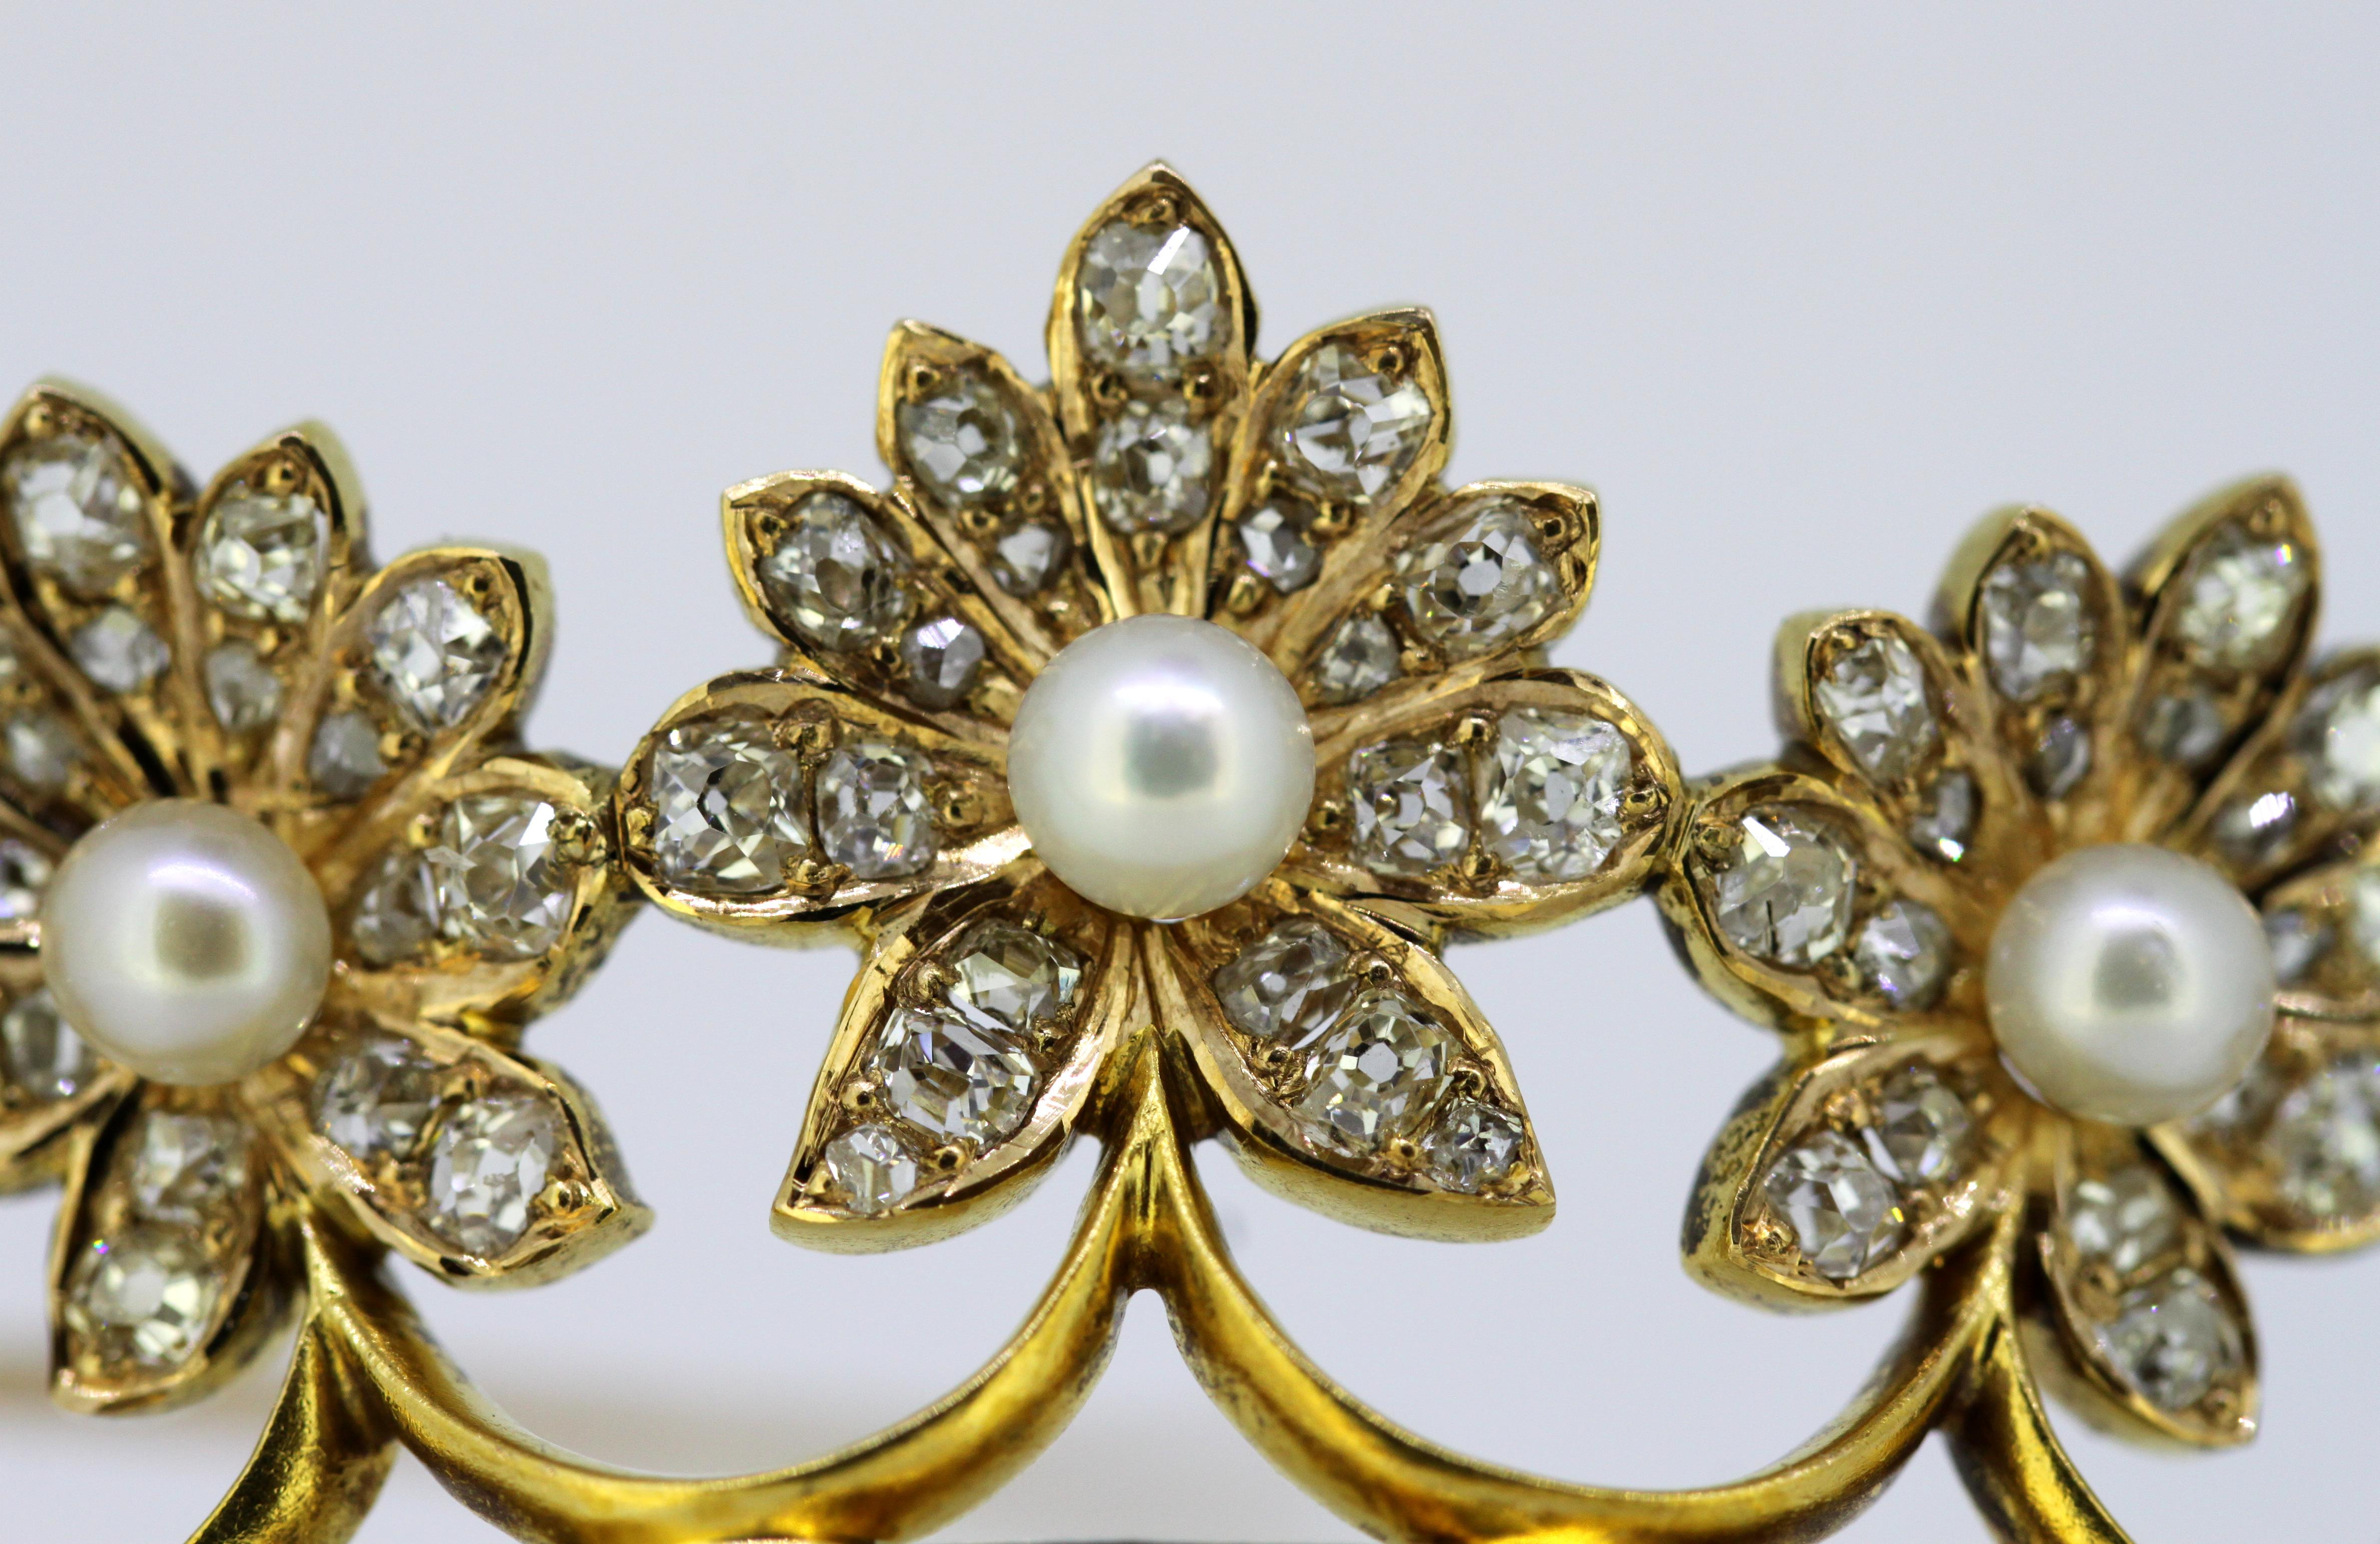 French 18 Karat Gold Brooch with Pearls Diamonds Rubies and Sapphires 4